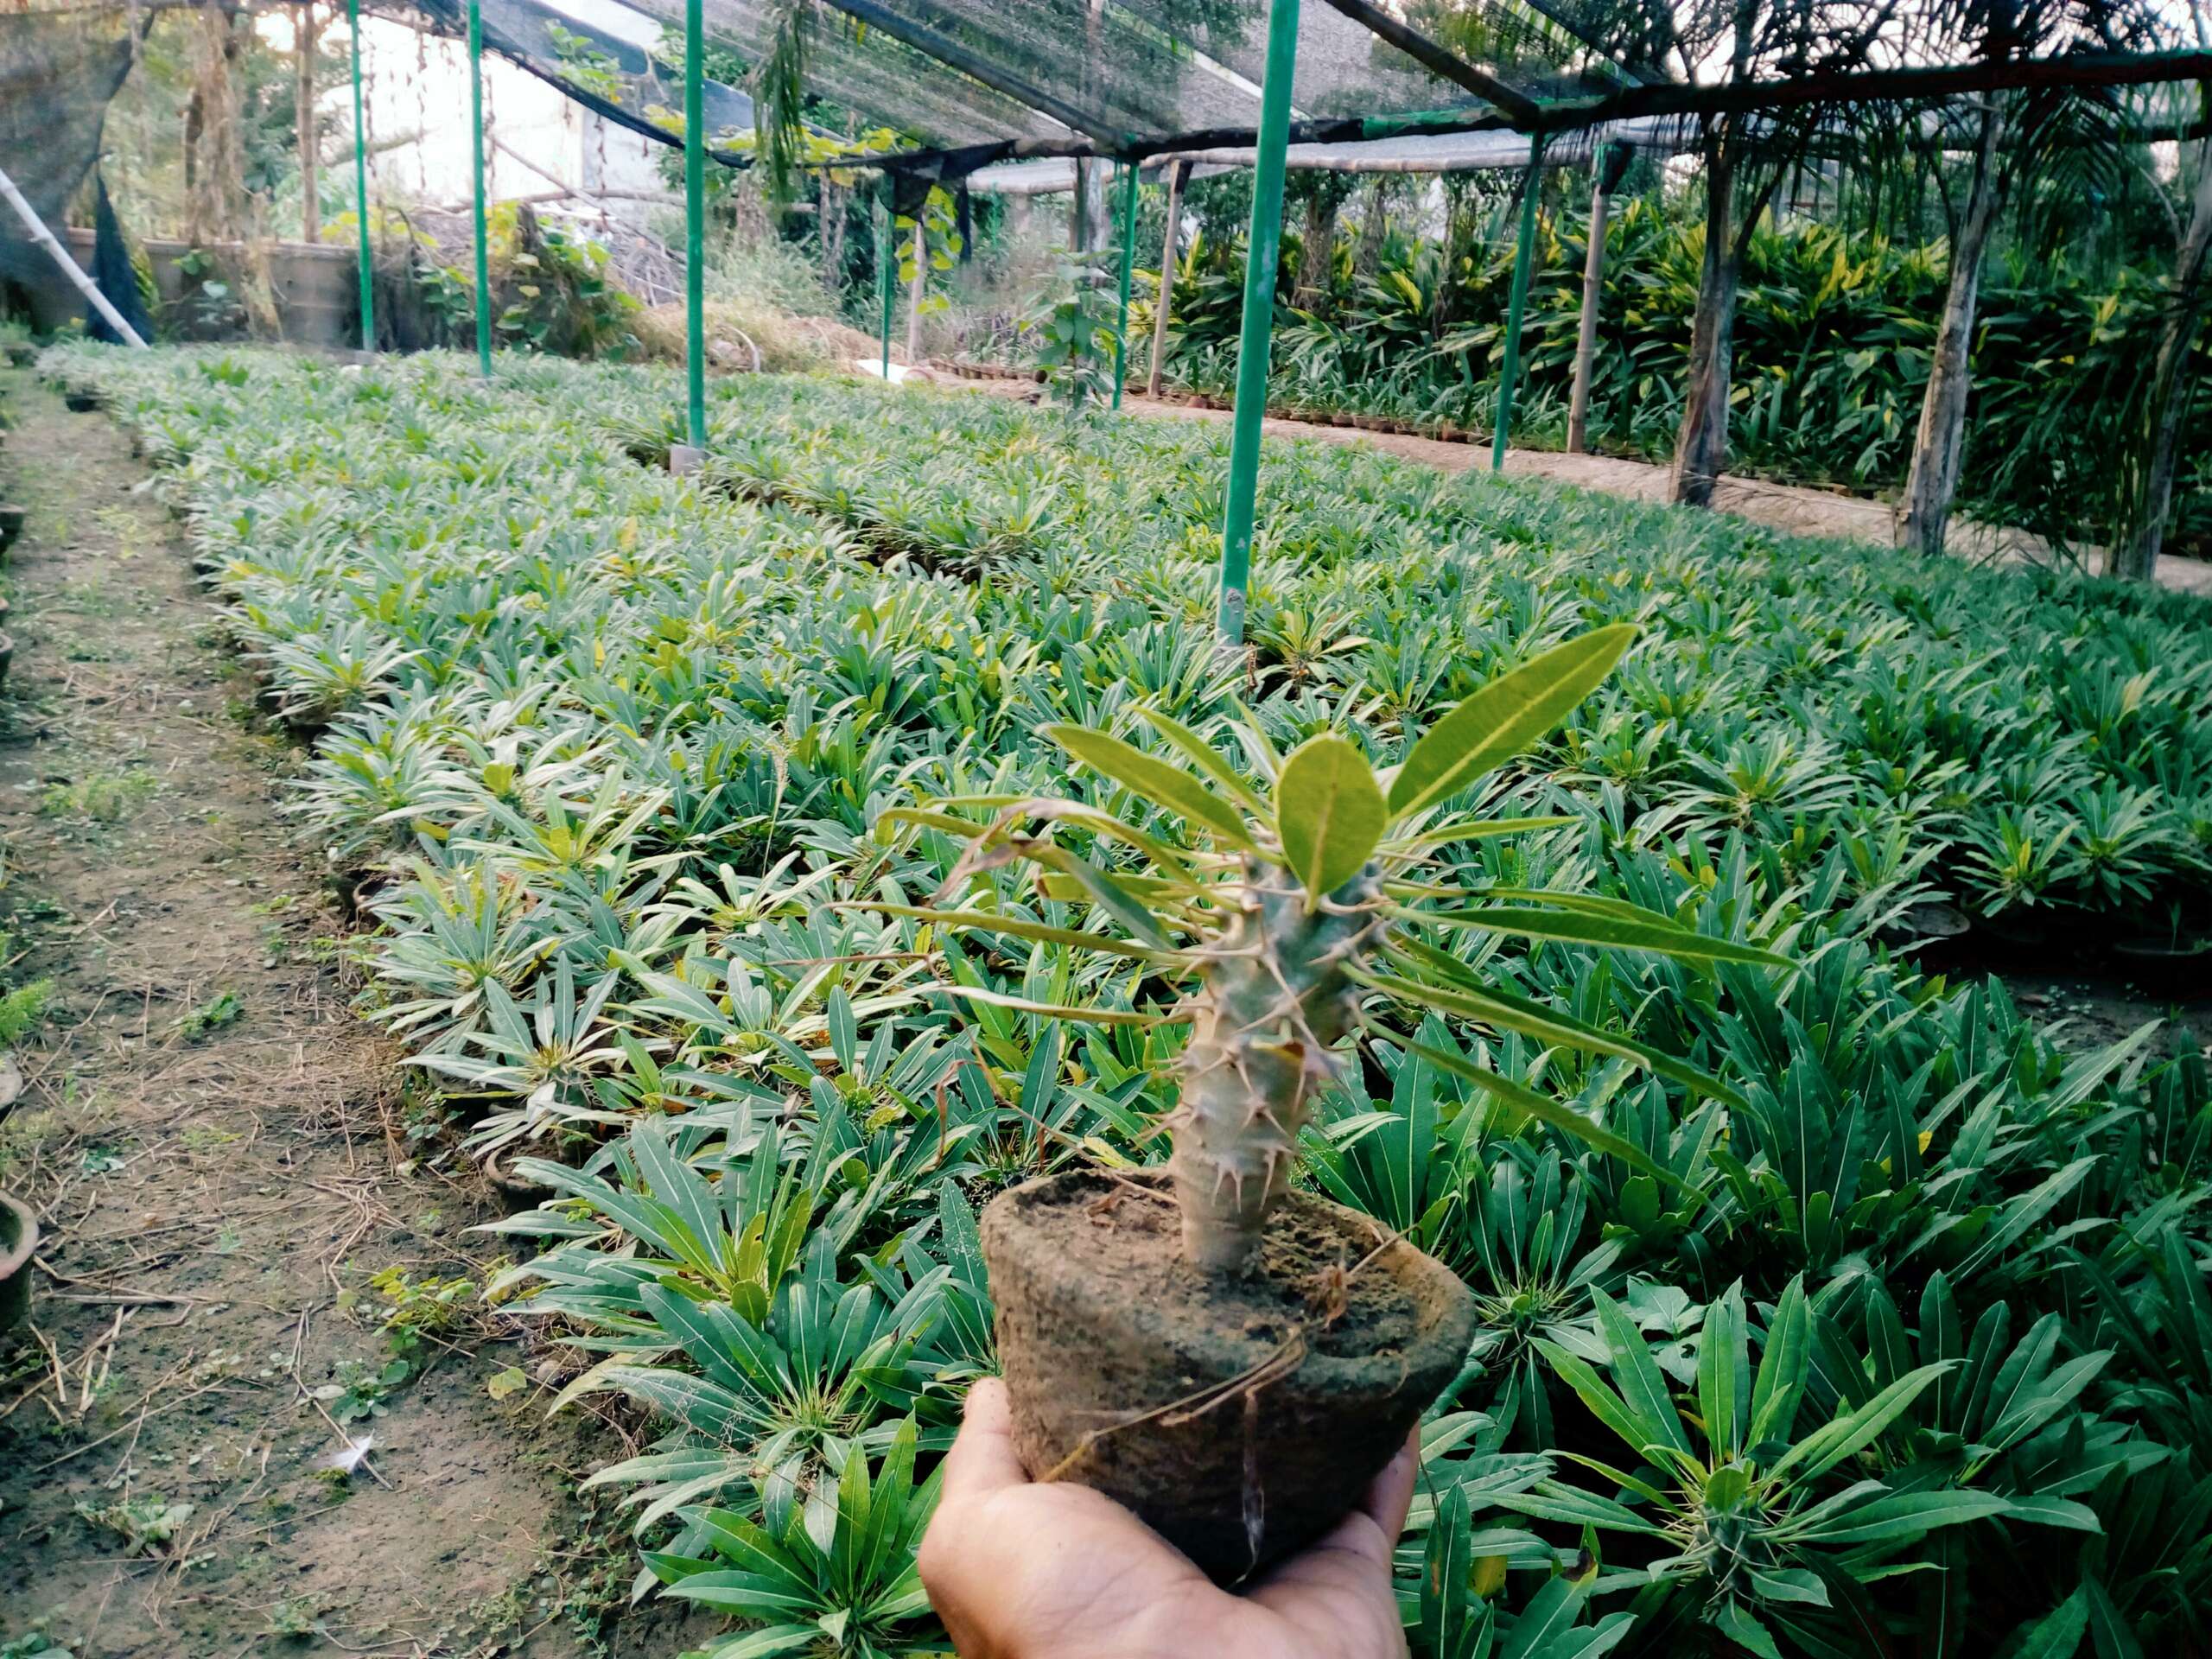 Pachypodium Seeds and Seedlings for Sale at AzizNursery.com